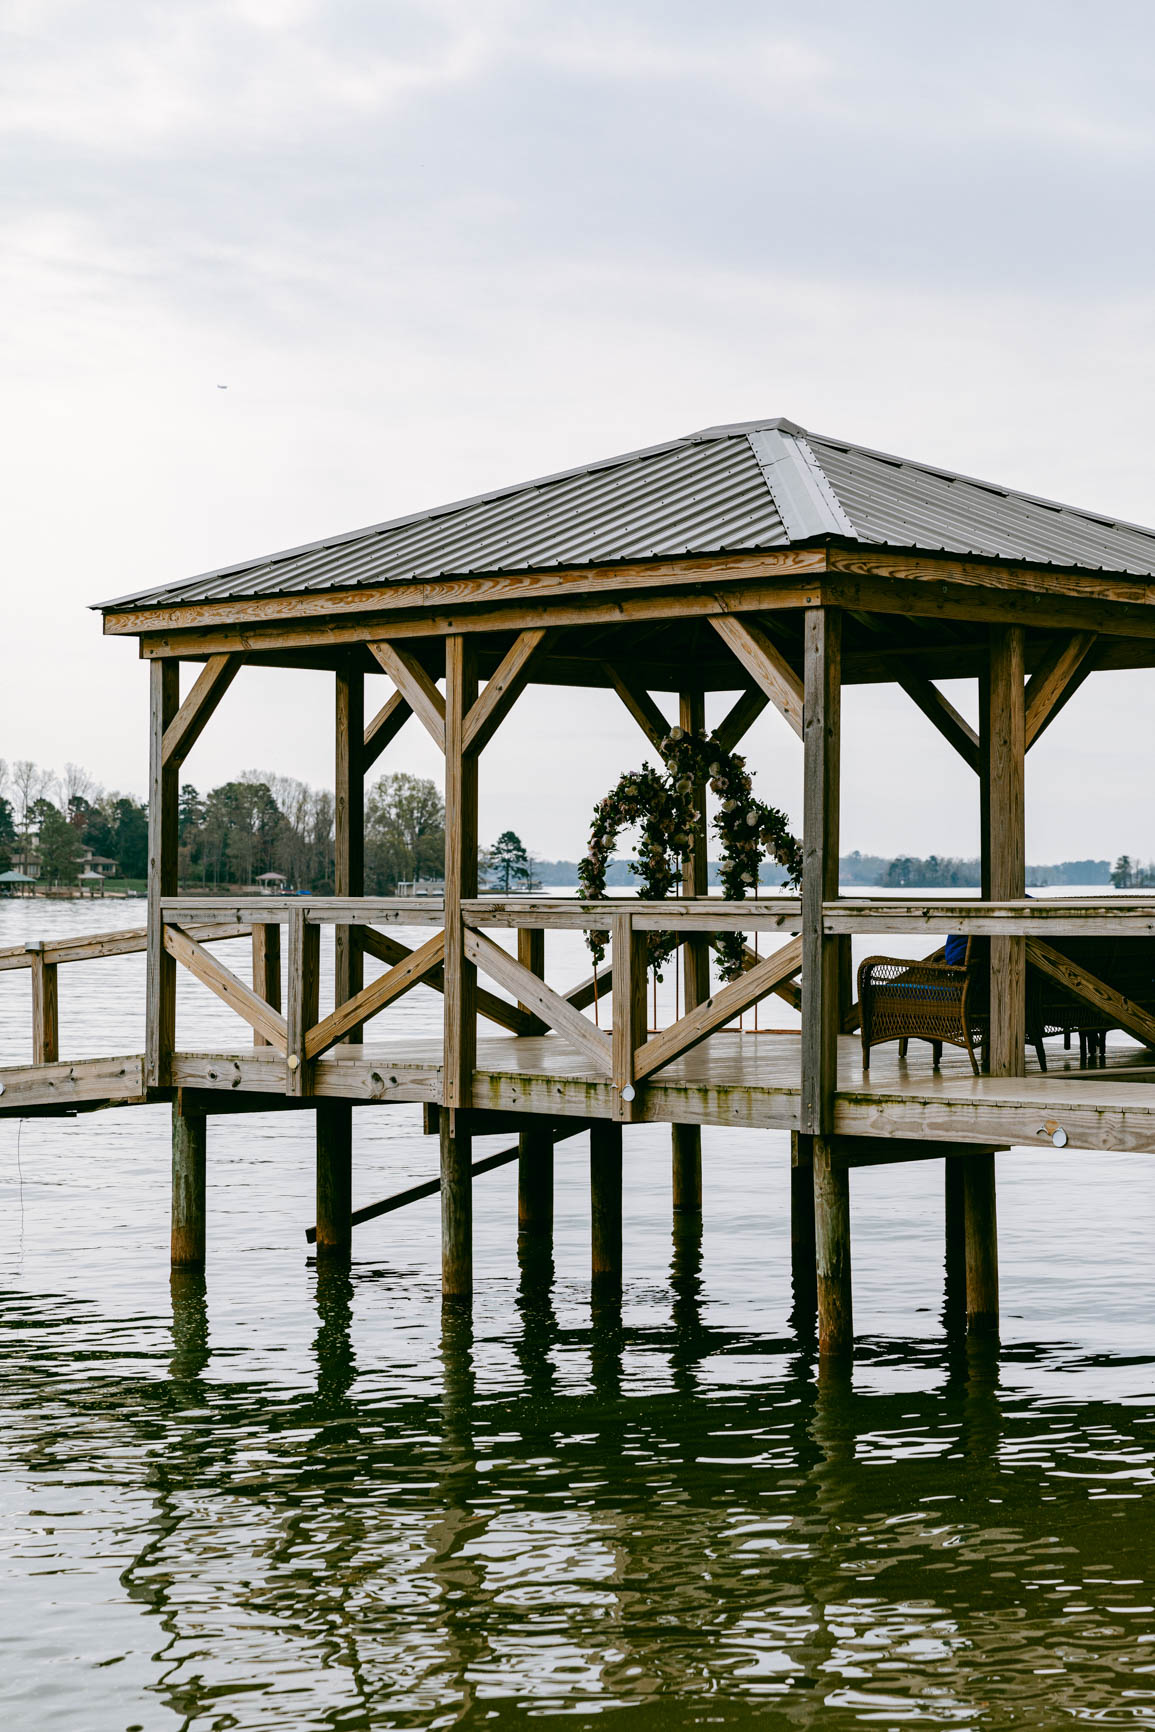 Lake dock elopement site in Mooresville, NC shot by Nhieu Tang Photography | nhieutang.com